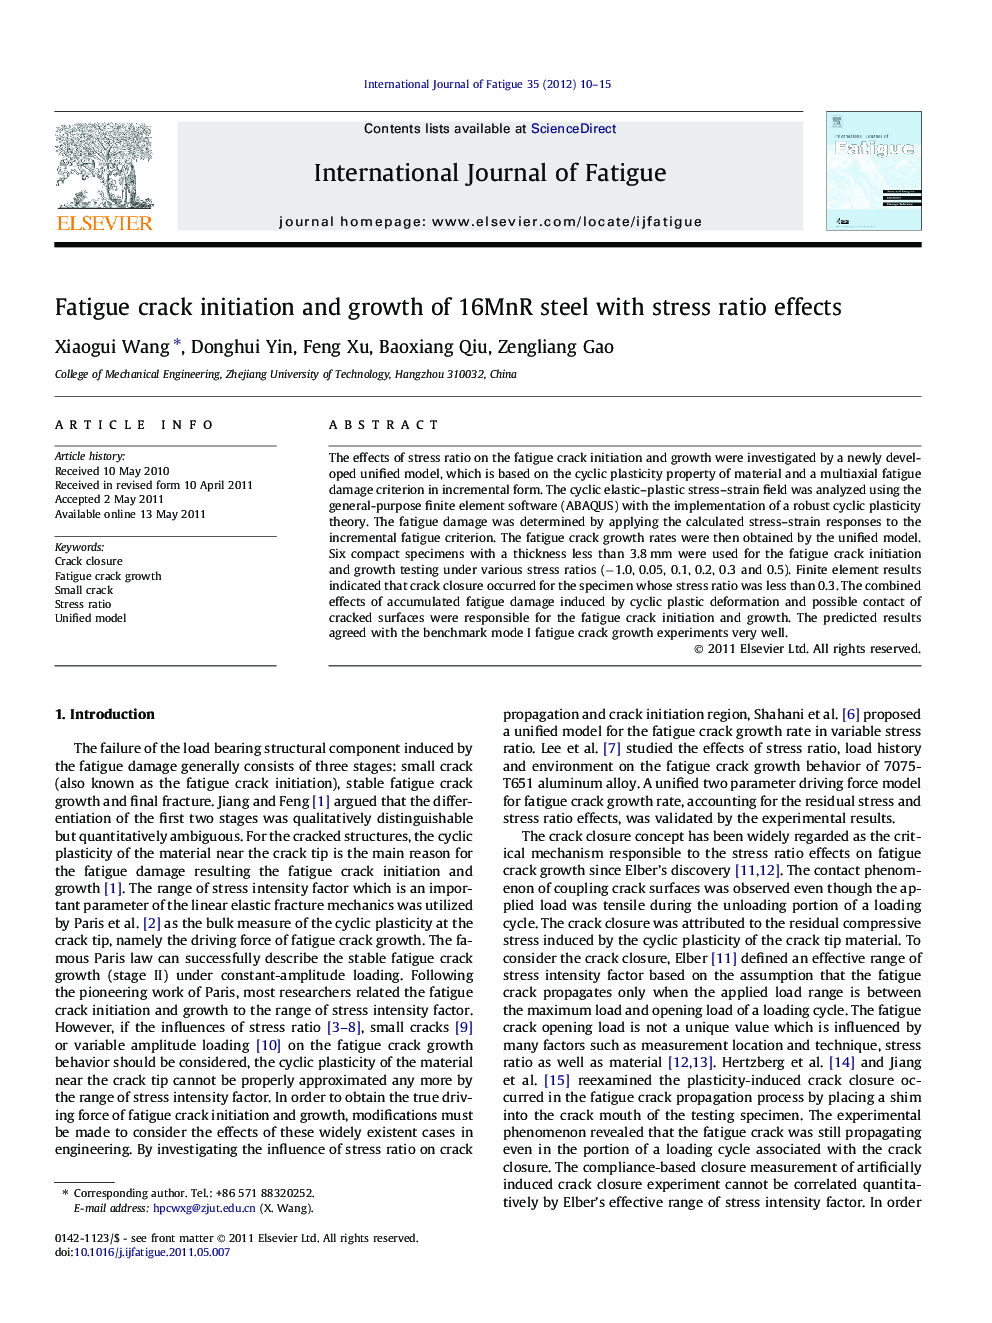 Fatigue crack initiation and growth of 16MnR steel with stress ratio effects